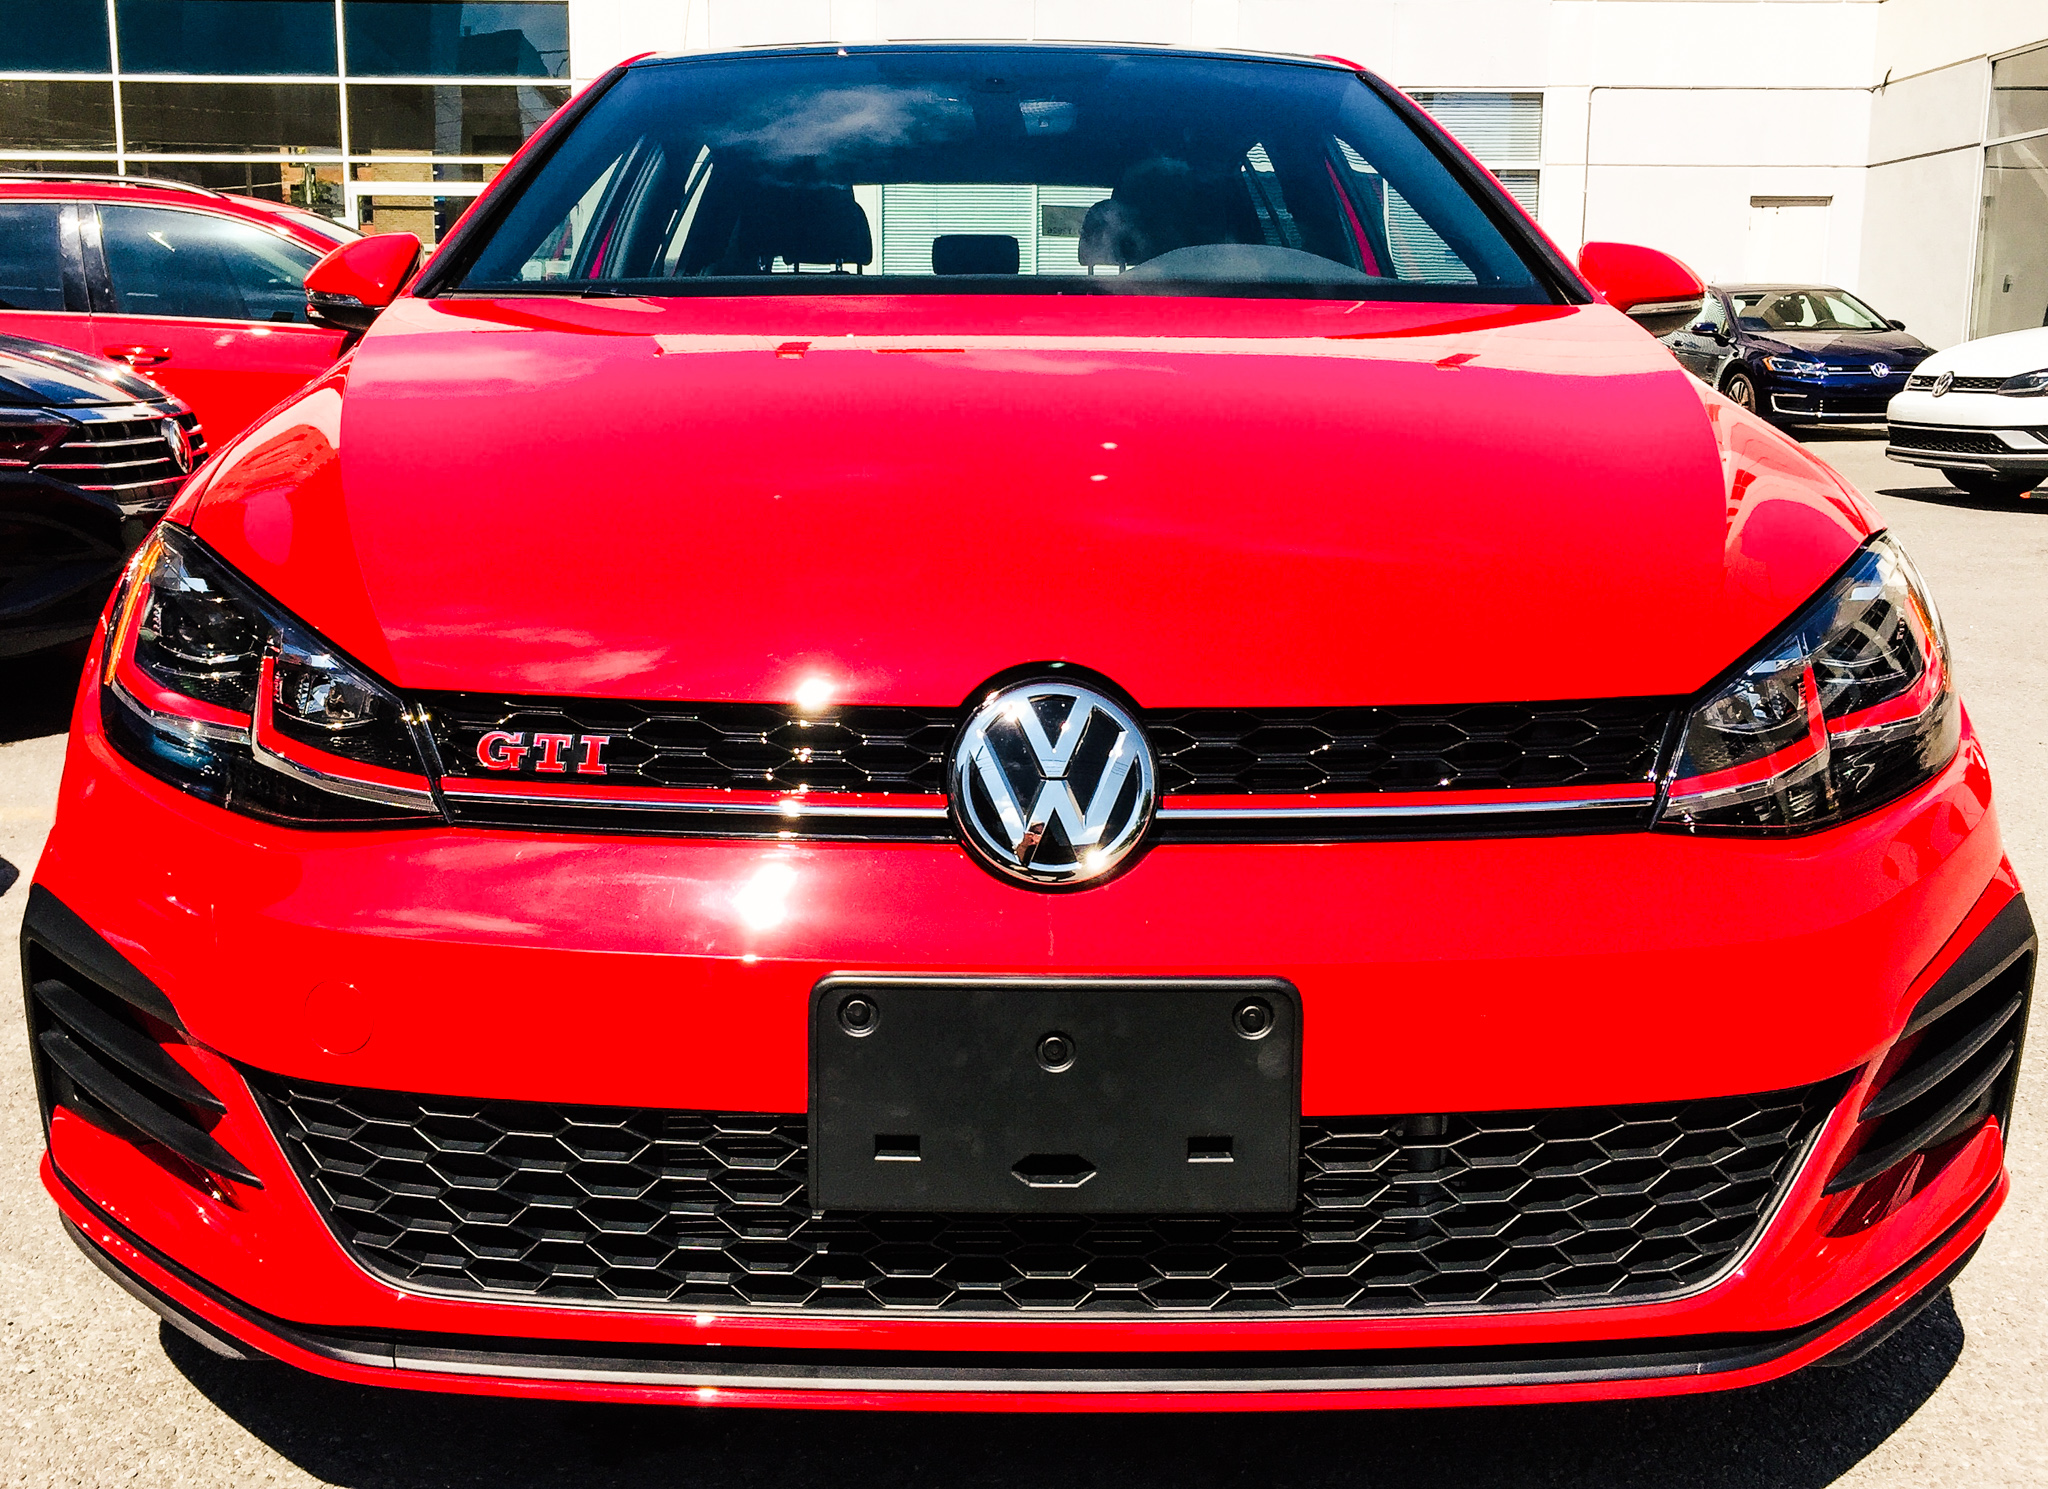 Official Tornado Red GTI / Golf Thread | Page 39 | GOLFMK7 - VW GTI MKVII  Forum / VW Golf R Forum / VW Golf MKVII Forum